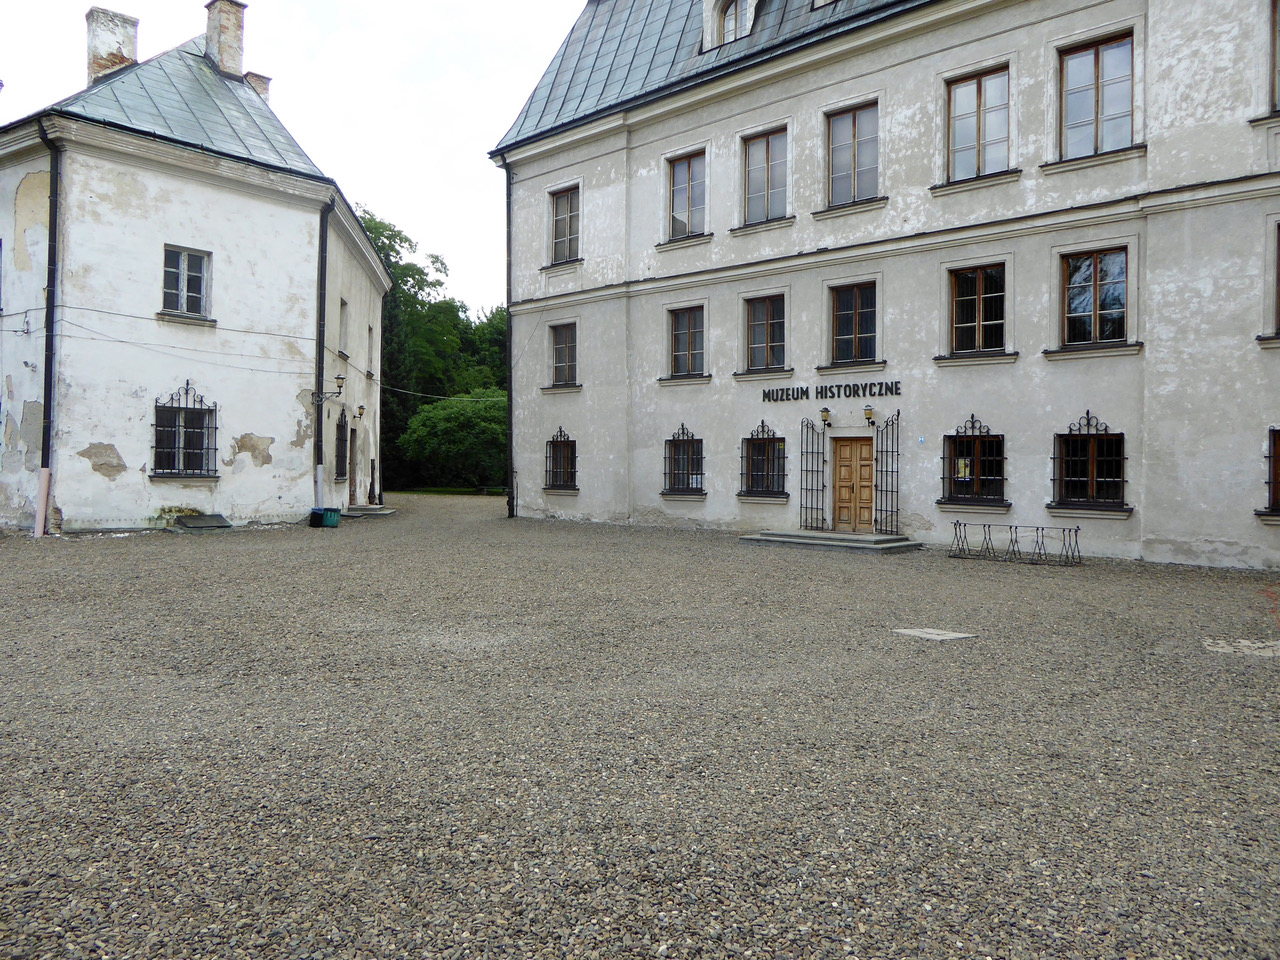 The Palace Courtyard